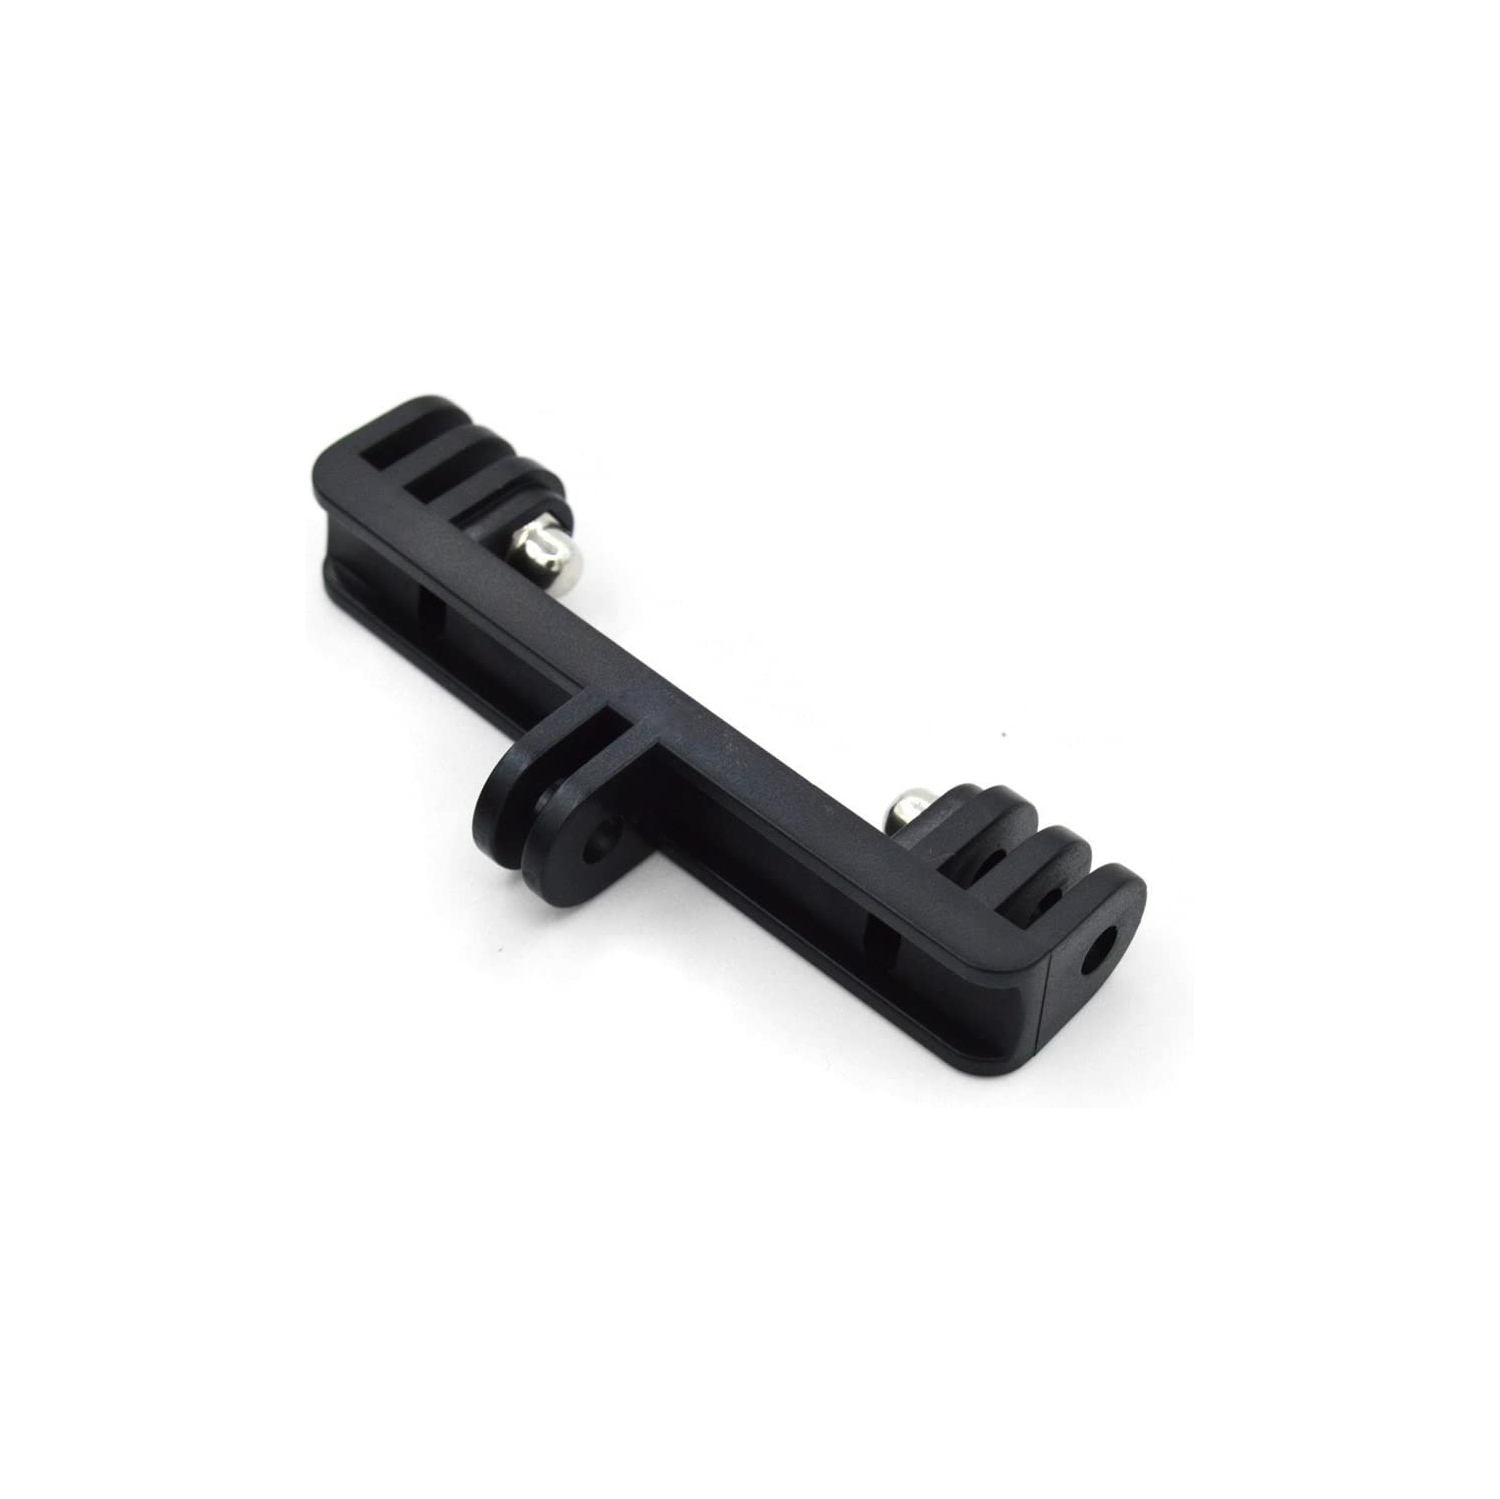 Dual Twin Mount Adapter for GoPro Hero 3+ 4 5 6 7 8 9 Compatible with Housing Monopod